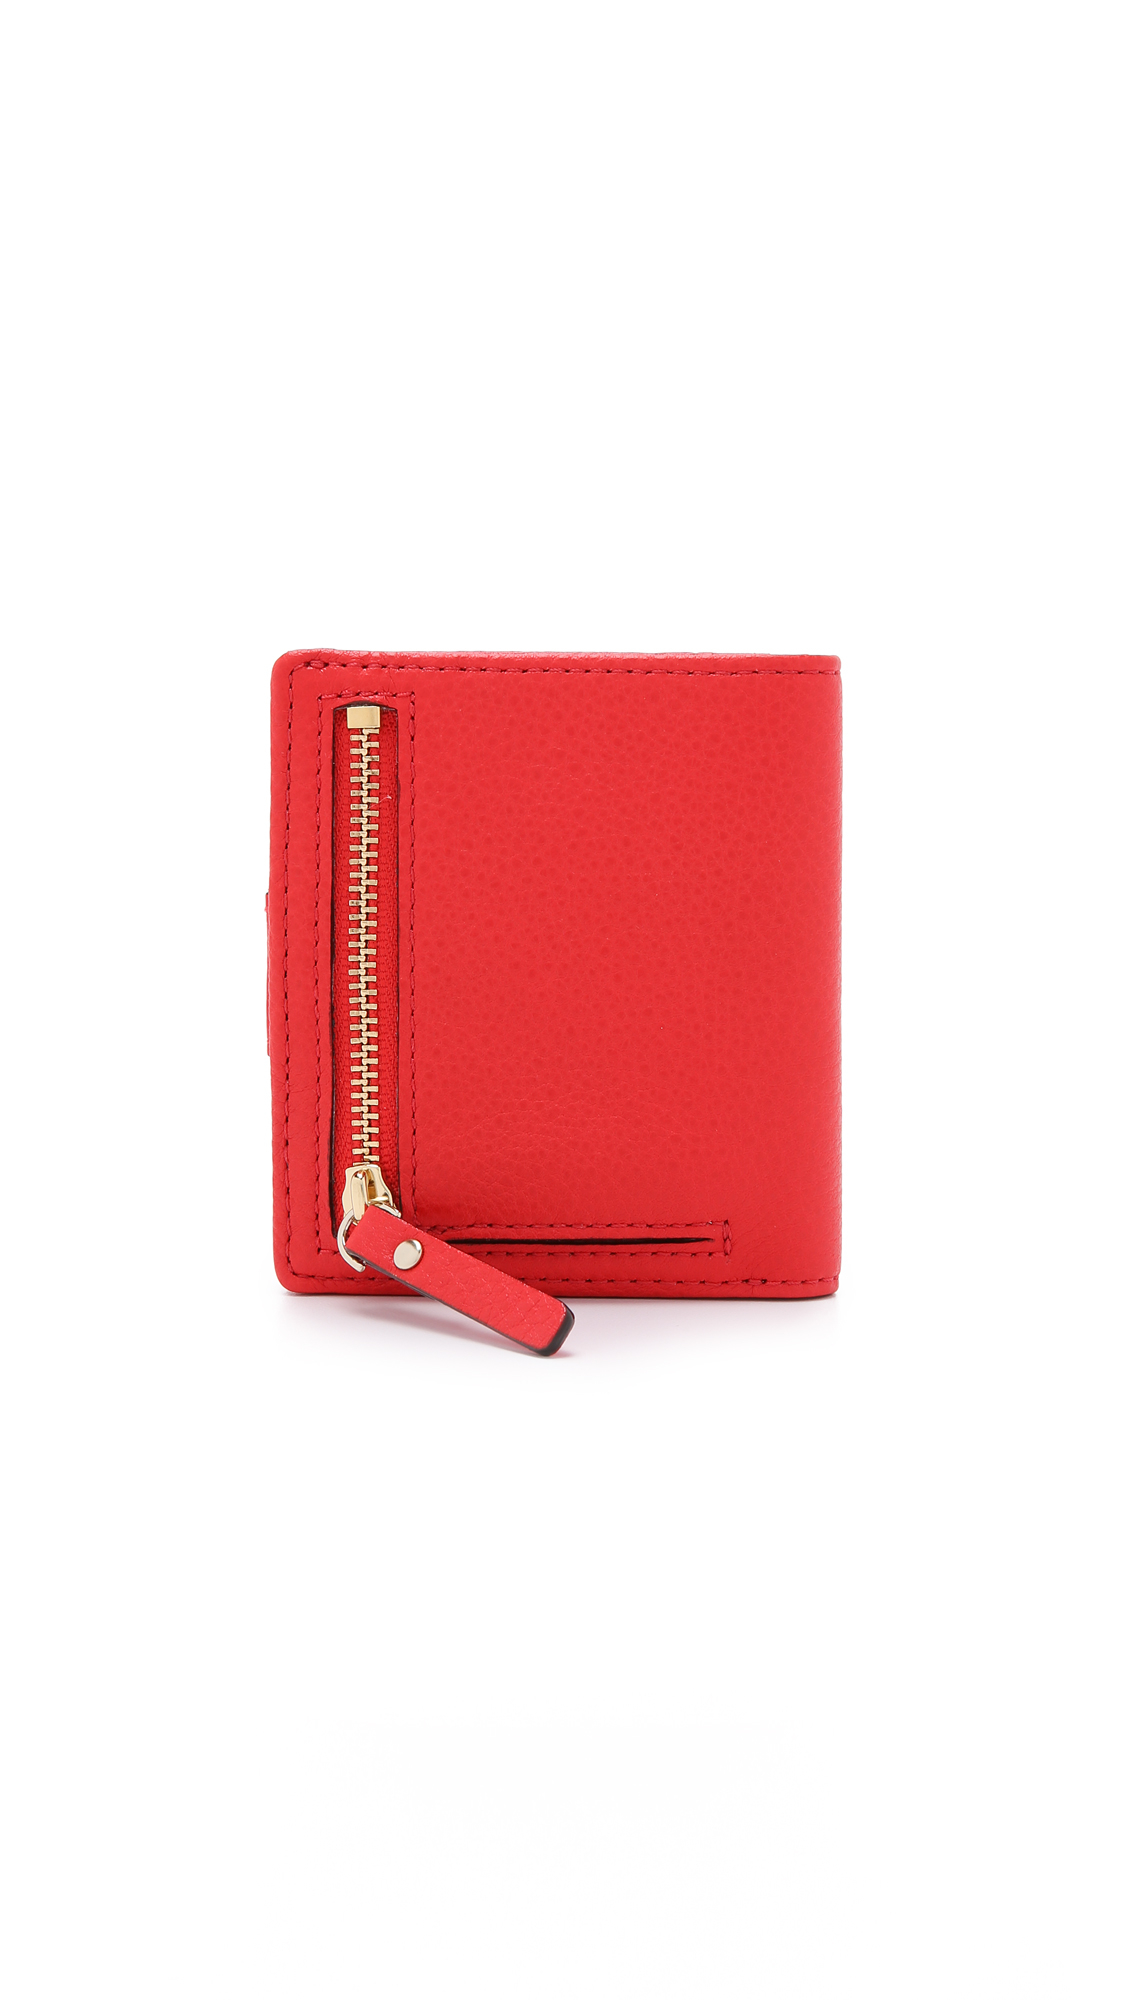 Kate spade new york Small Stacey Wallet - Cherry Liquer in Red | Lyst